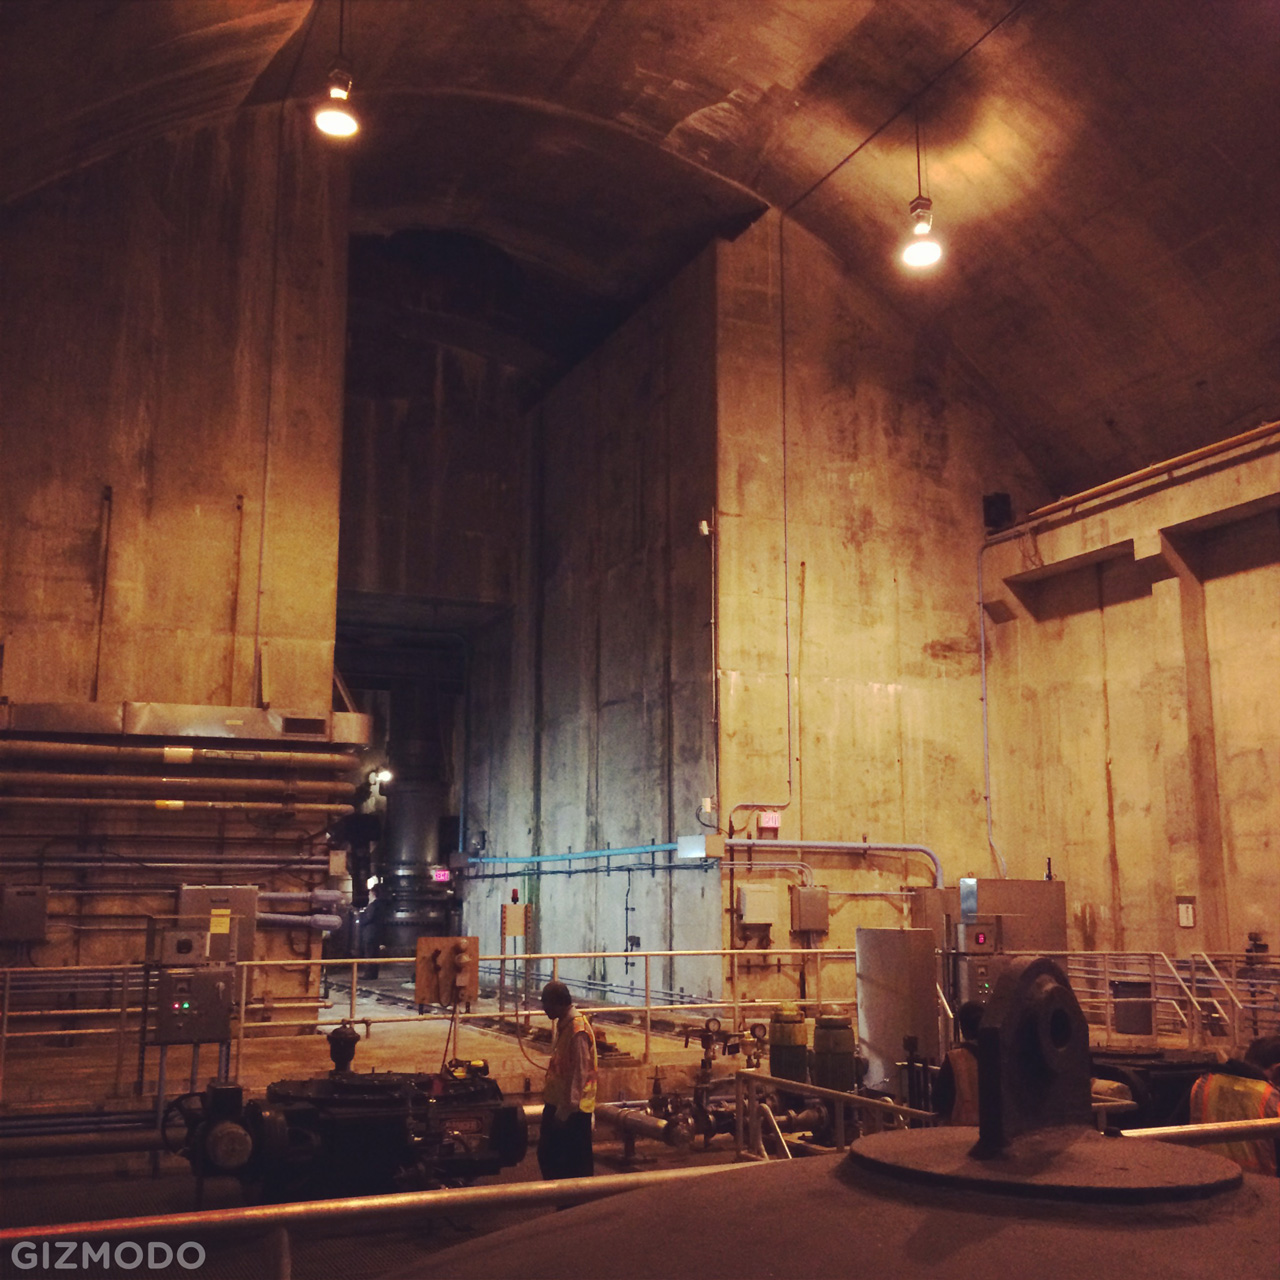 Supertunnels And Supertalls: The Superlative Building Stories Of 2013